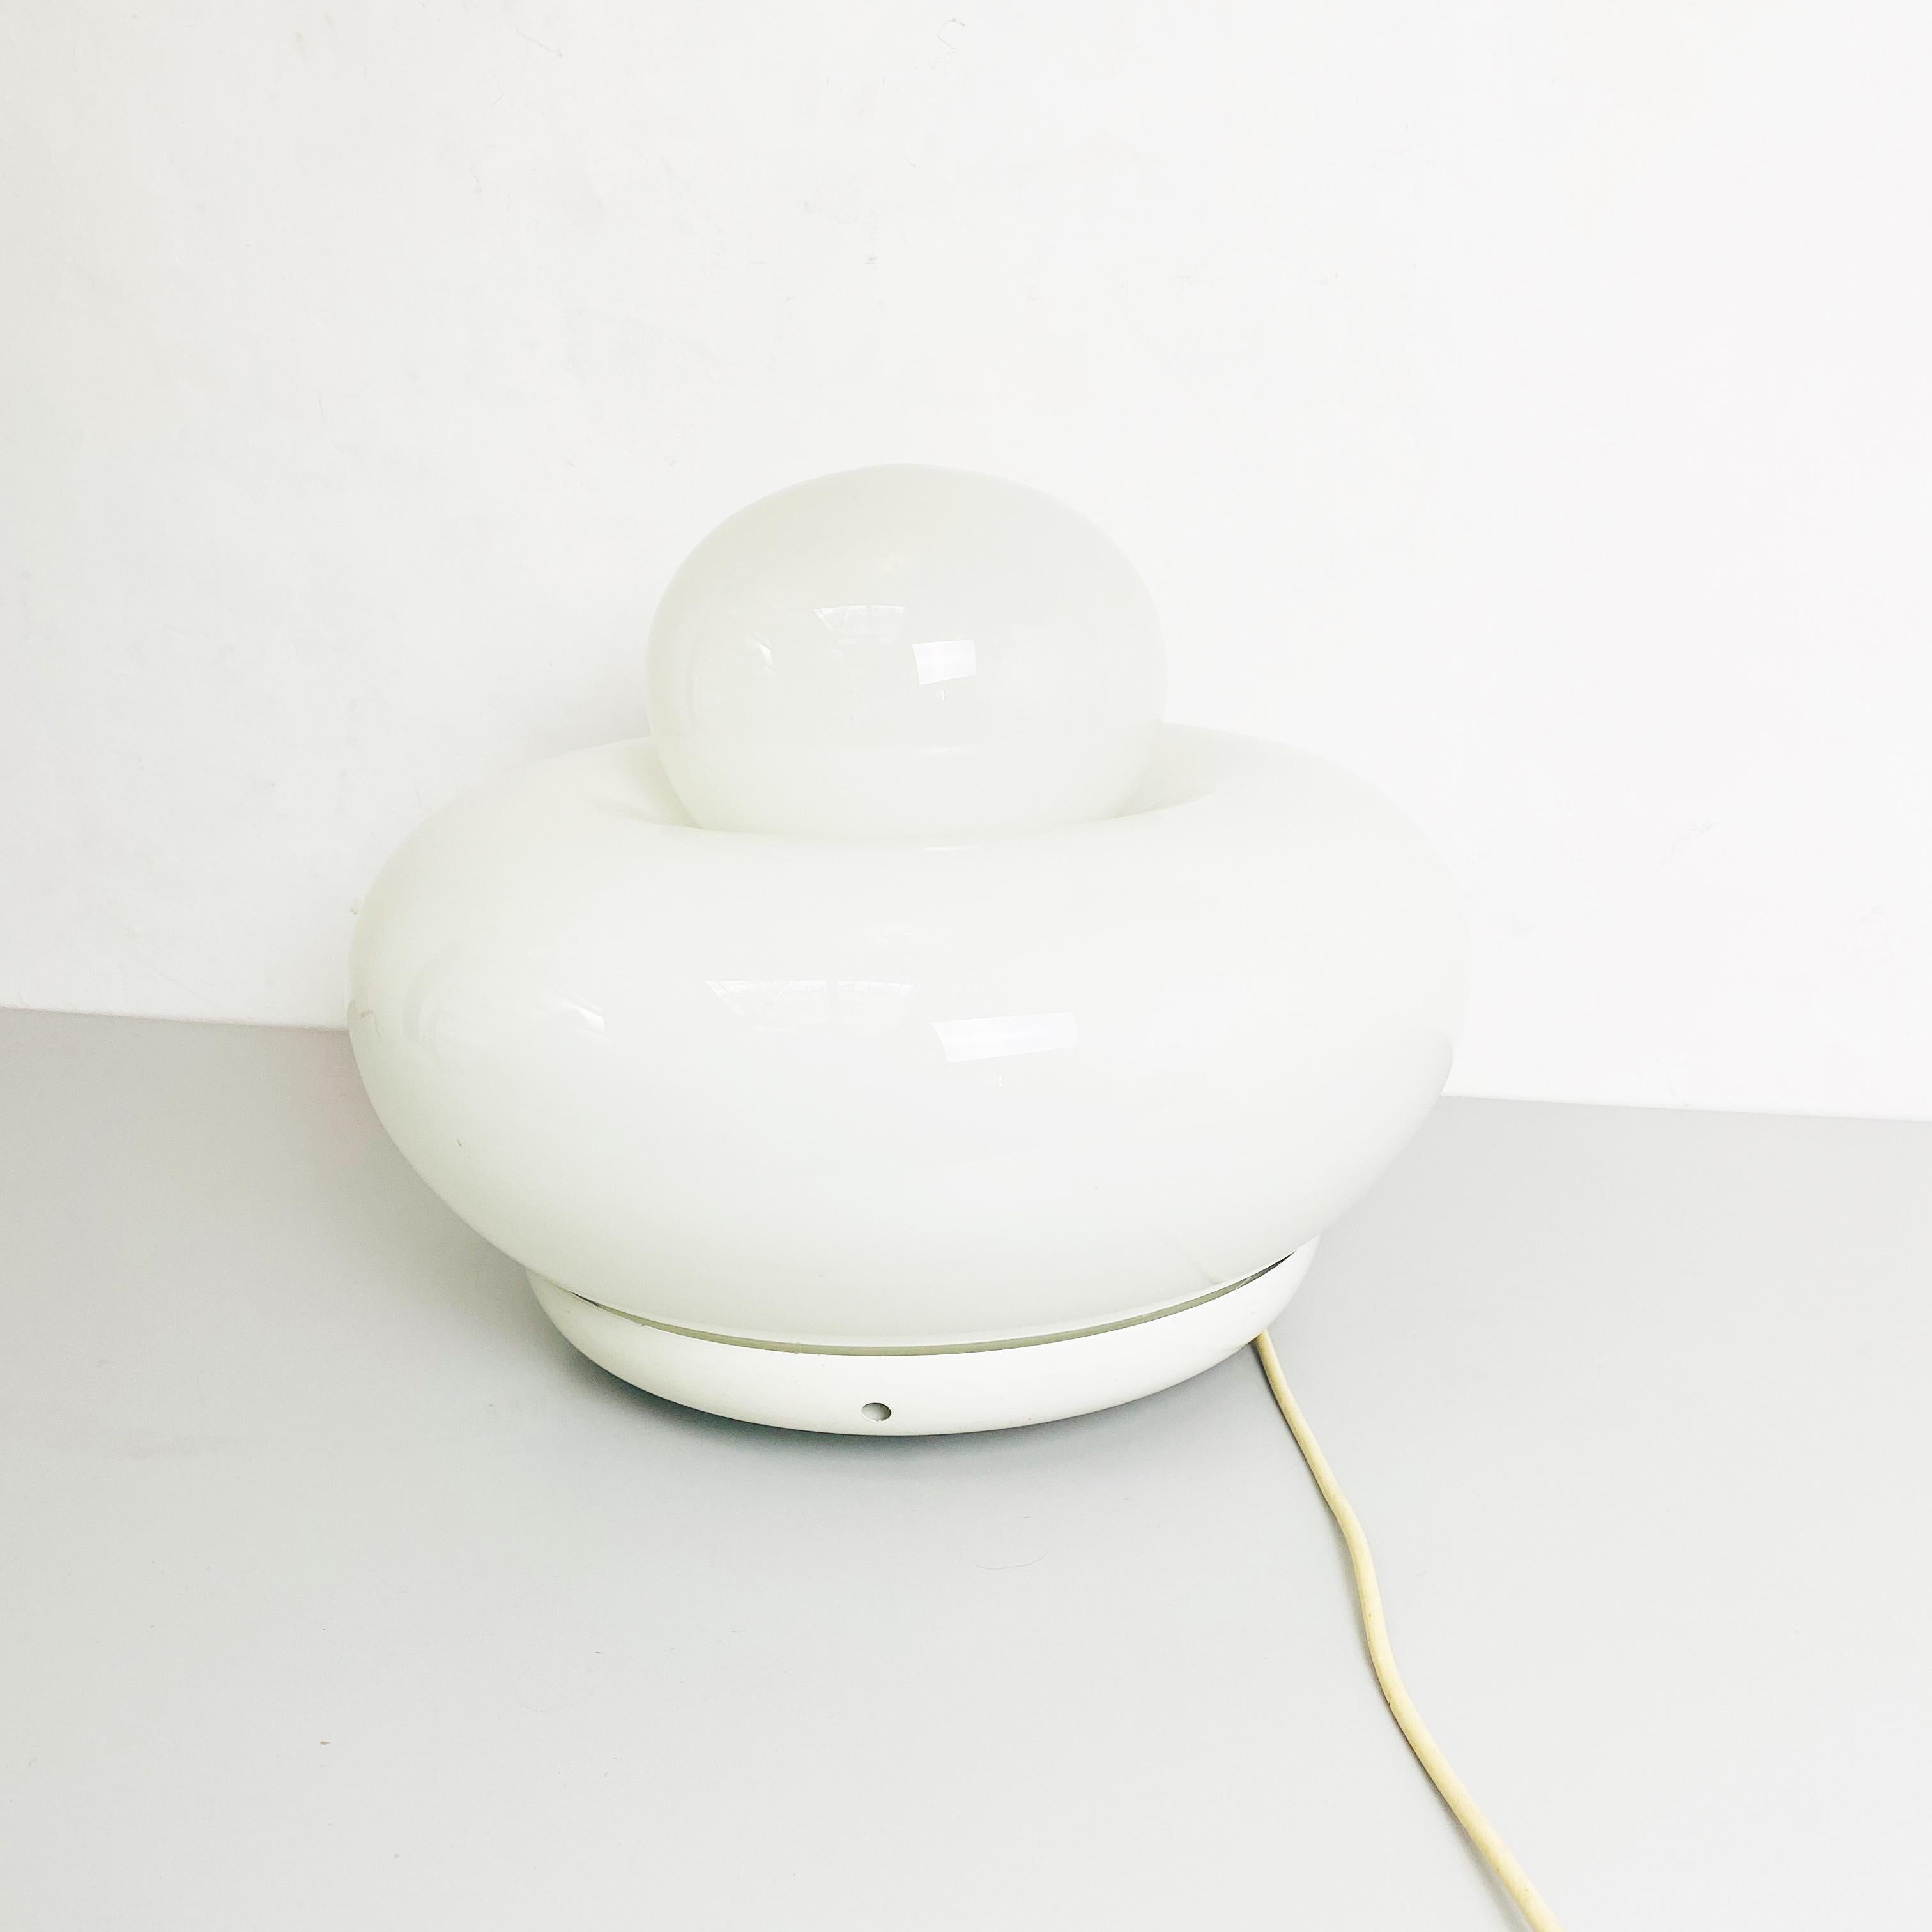 Italian Modern Electra Table Lamp by Giuliana Gramigna for Artemide, 1968 For Sale 1